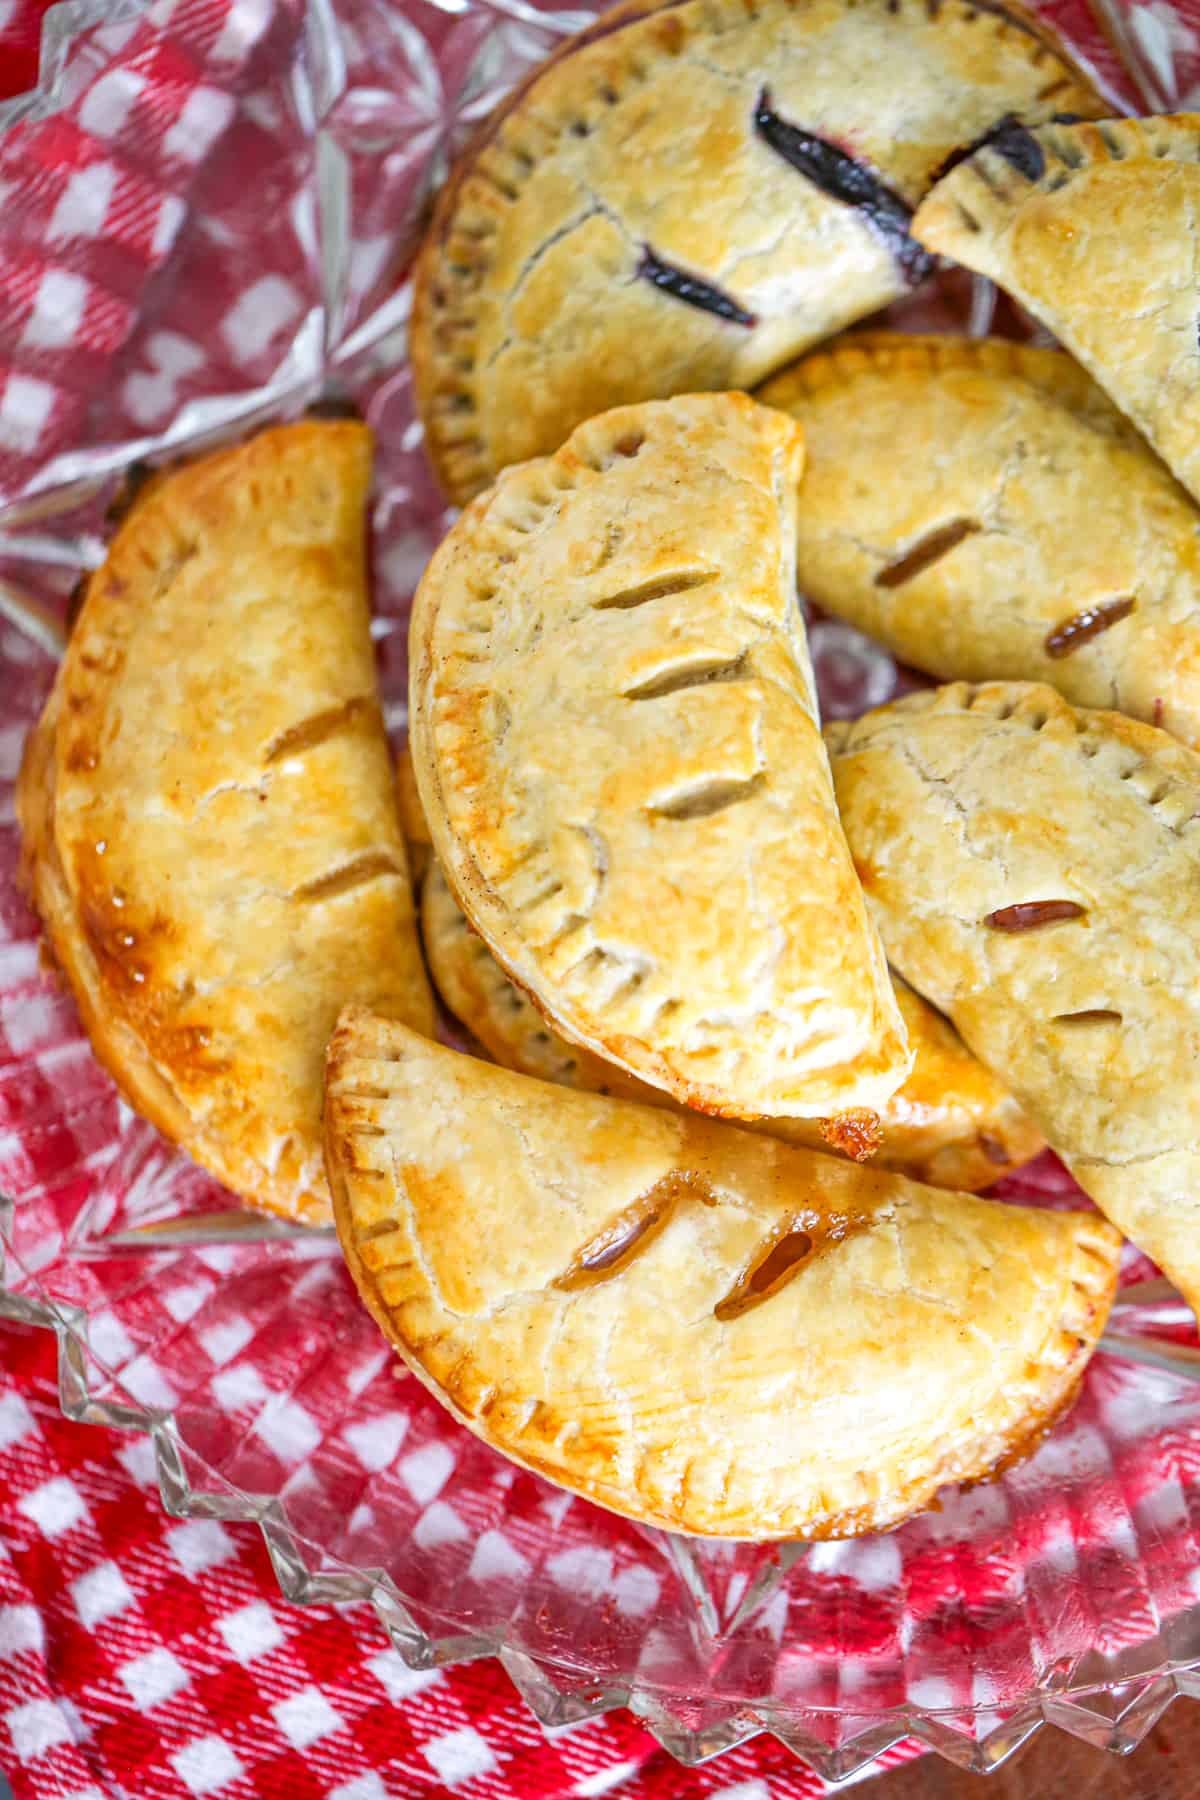 easy hand held pies recipe with shortcuts apple, blueberry, cherry, peach, blueberry, raspberry fillings using pie crust and topped with glaze